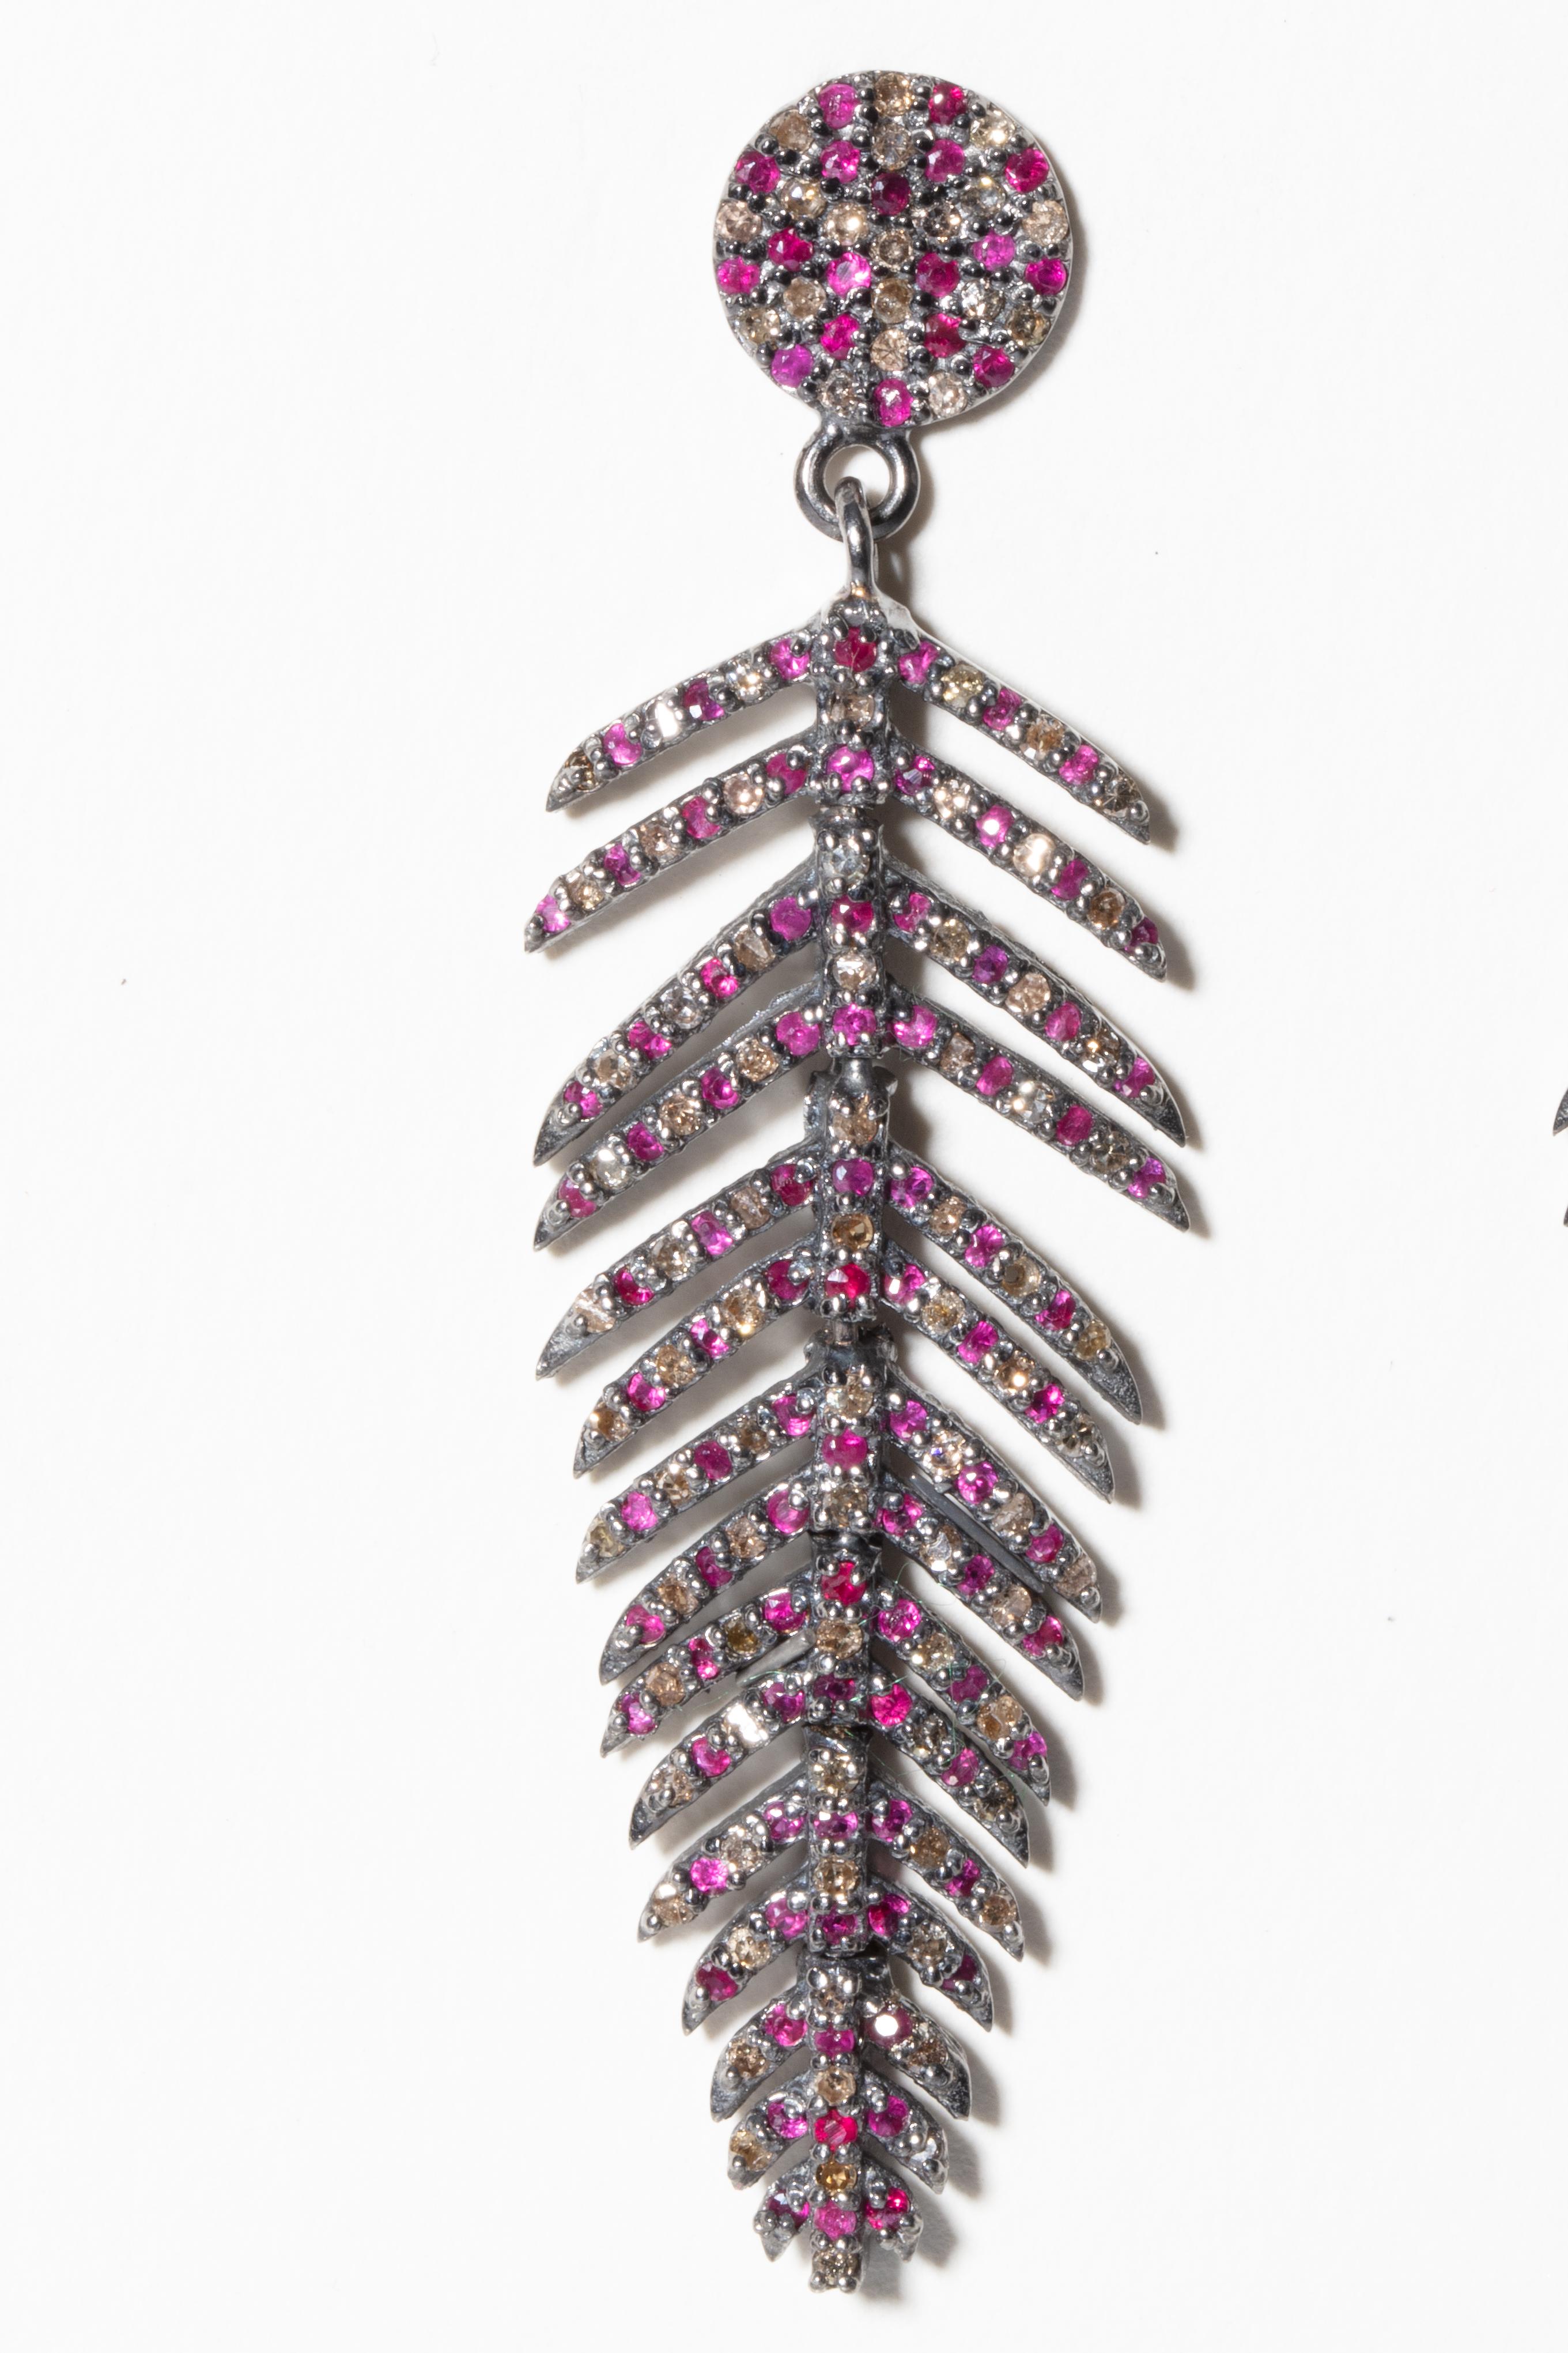 A pair of brilliant-cut, pave`-set diamond and Burmese ruby feather earrings.  Set in an oxidized sterling silver with 18K gold post for pierced ears.  Weight of diamonds is 1.10 carats, rubies are 1.66 carats.  An articulated spine offers movement